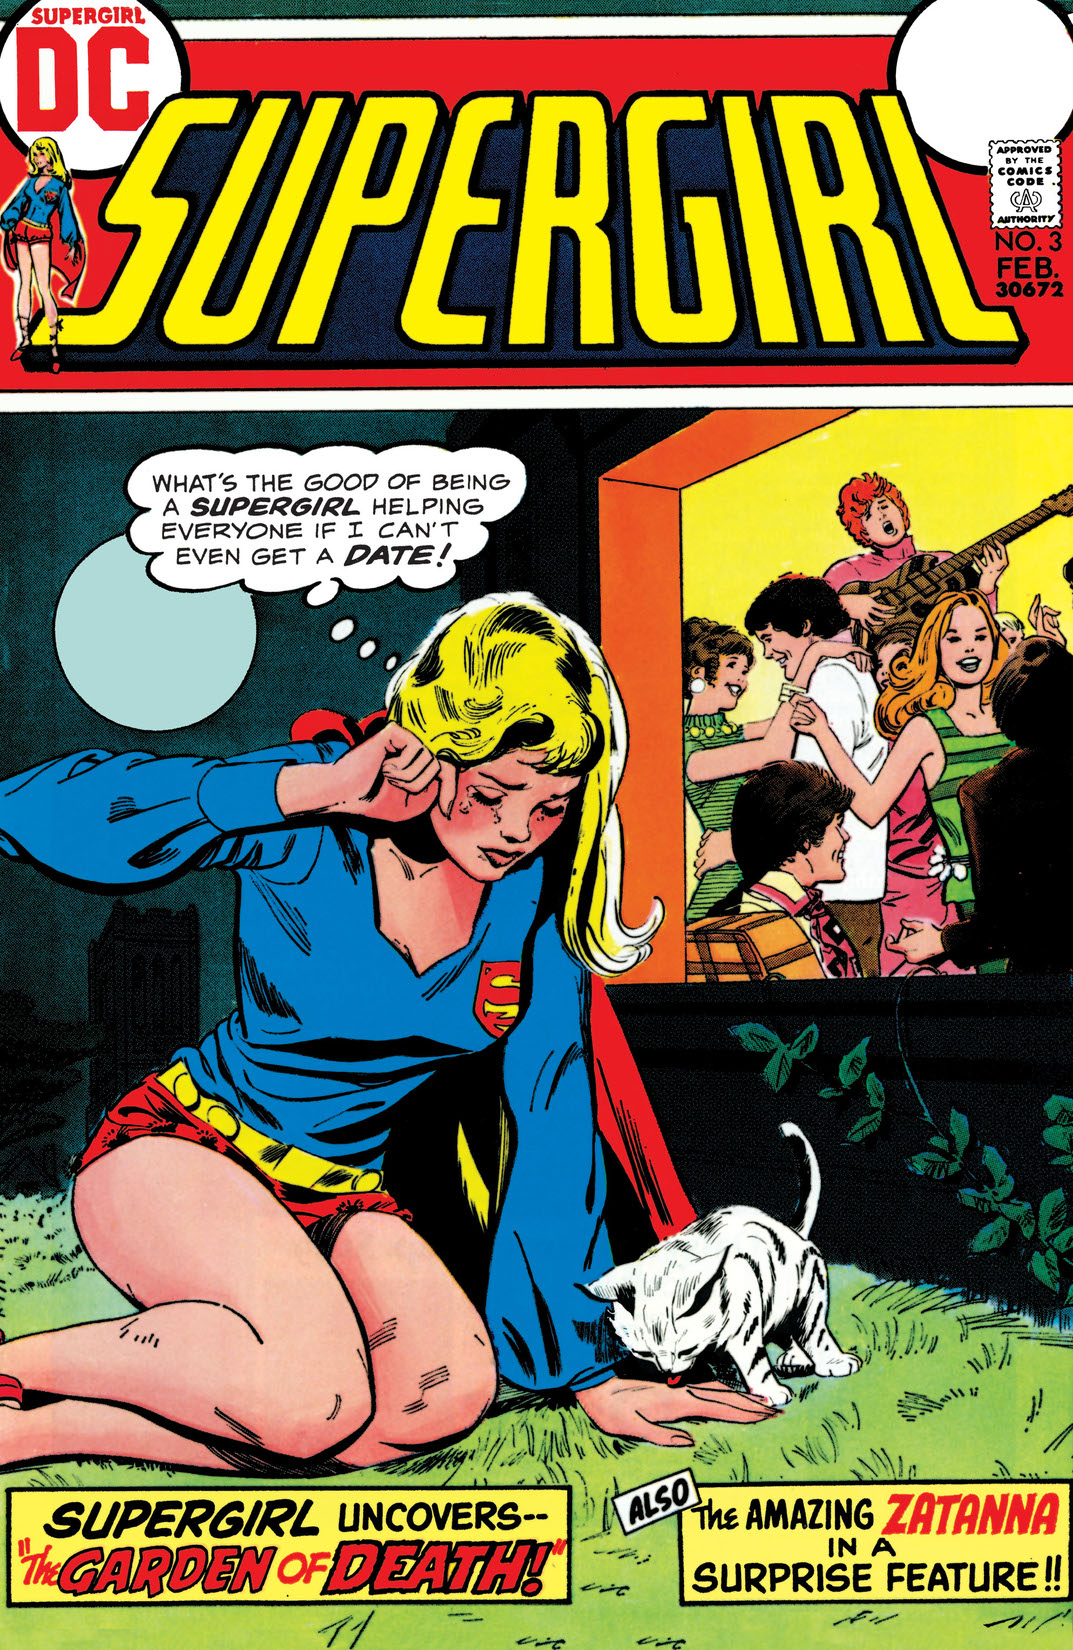 Supergirl (1972-) #3 preview images